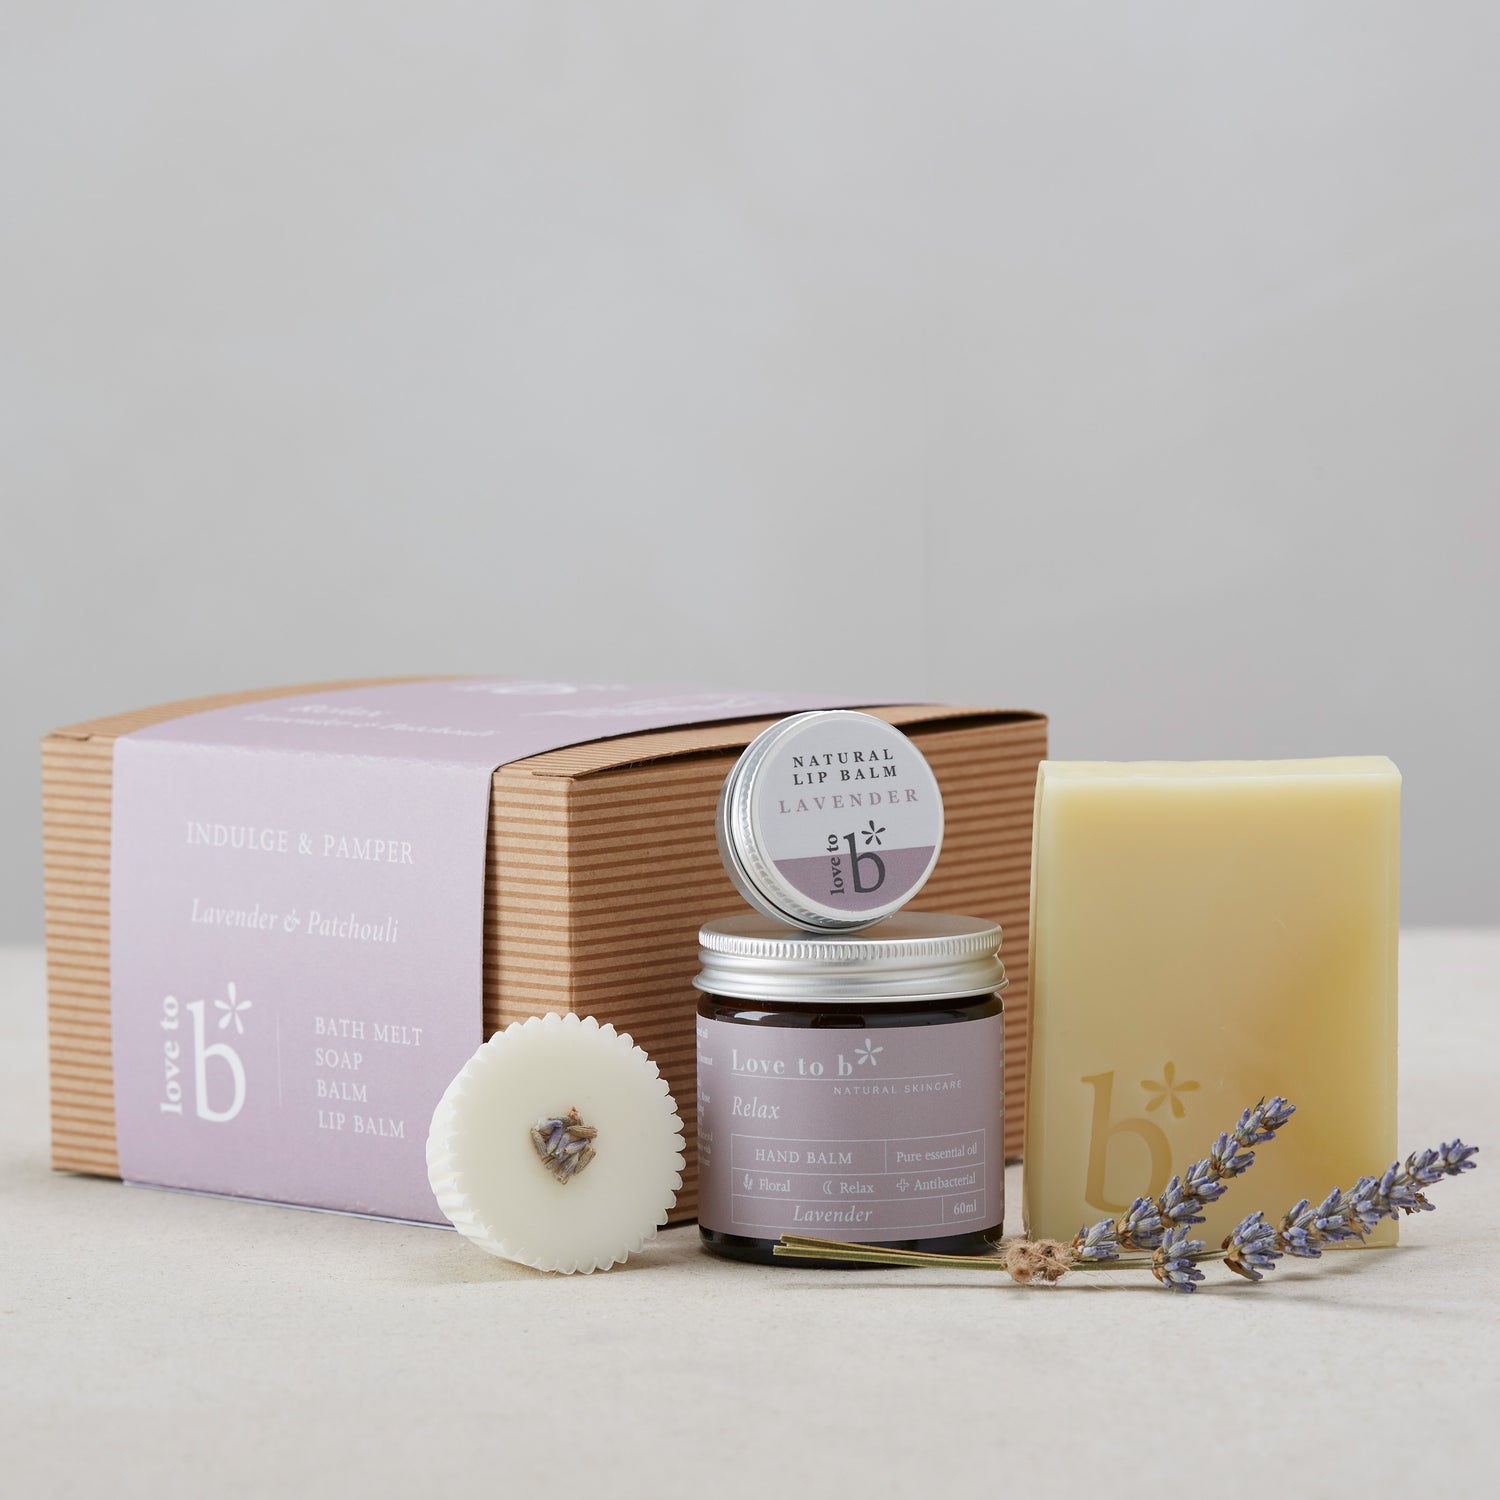 Love to b Natural Skincare Relaxing Lavender Indulge &amp; Pamper Gift Set with Relaxing Lavender Hand Balm, Lavender Bath Melt, Natural Lavender Lip Balm &amp; Lavender Soap Bar